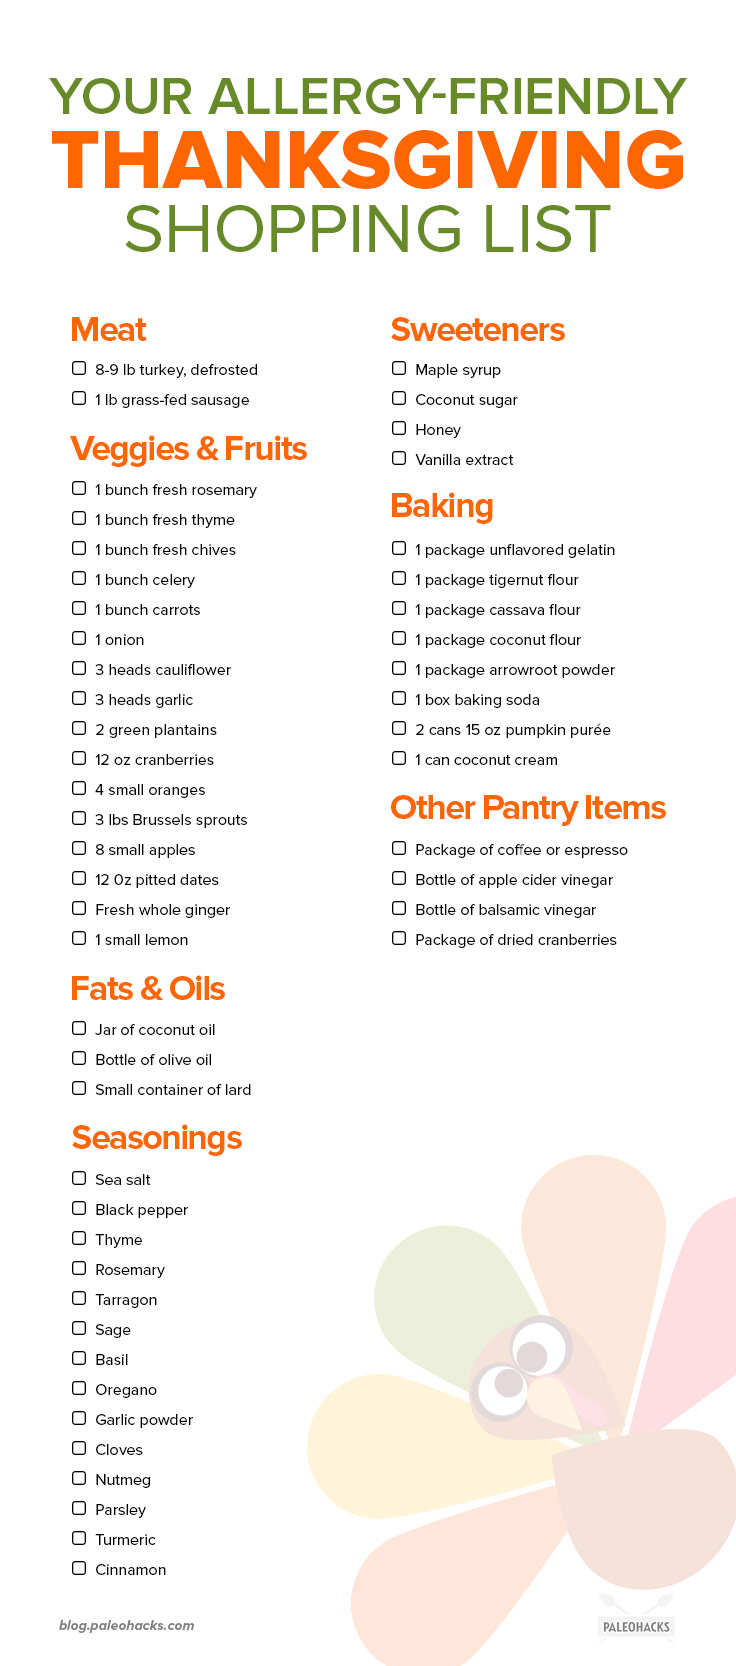 Finding holiday recipes for friends and family can be tricky. Luckily, this easy Thanksgiving guide to allergy-friendly meals is here to help.